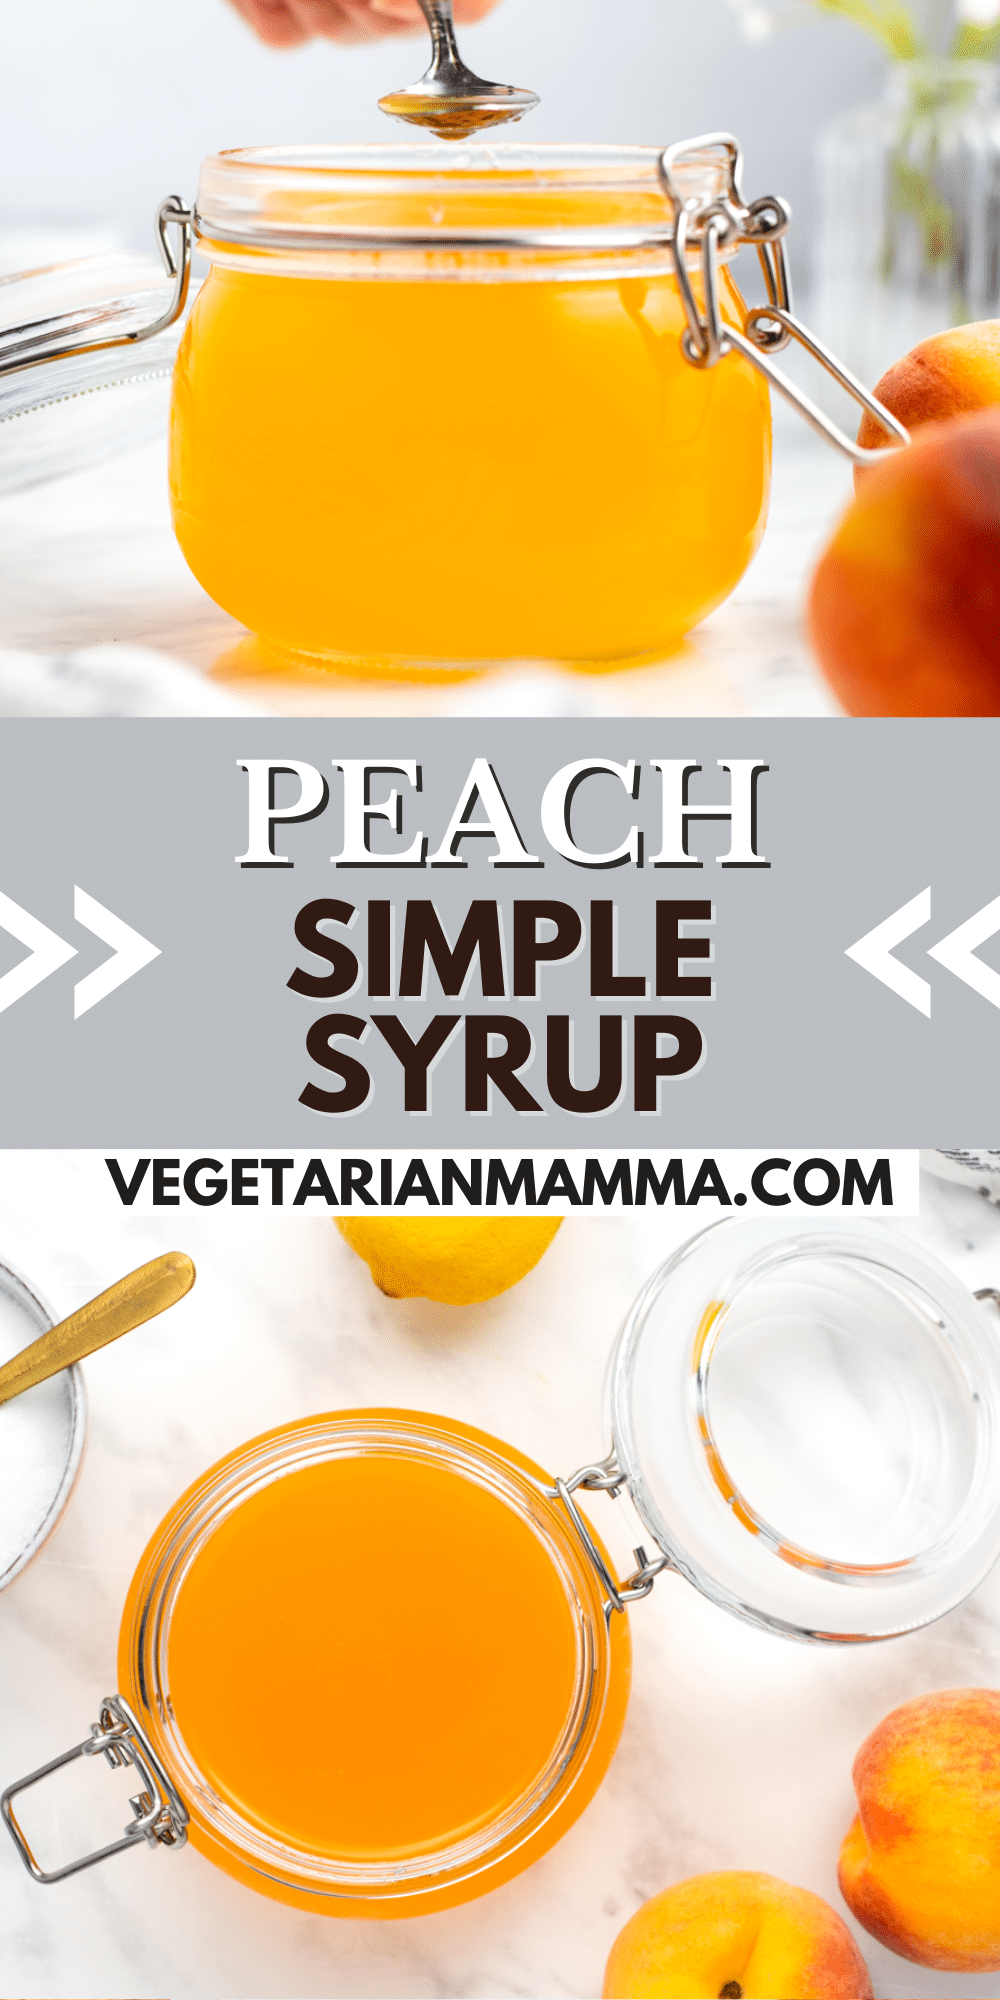 two image of a jar of peach simple syrup. Text title is in the center and says "peach simple syrup"